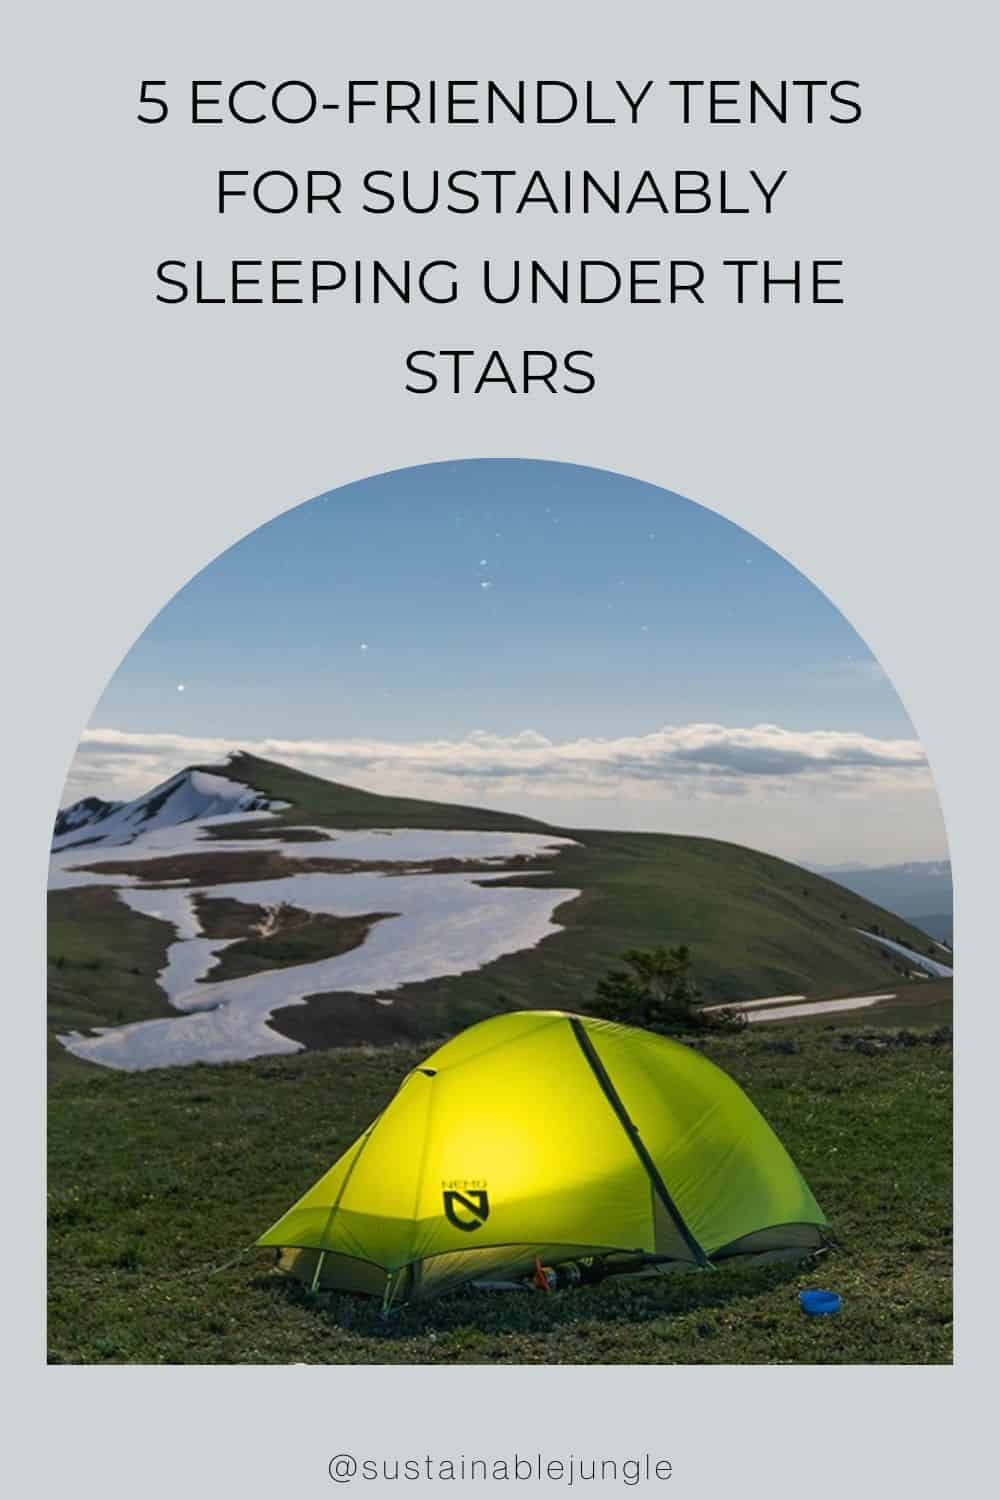 5 Eco-Friendly Tents For Sustainably Sleeping Under The Stars Image by NEMO #ecofriendlytents #ecofriendlycampingtent #sustainabletents #sustainablecampingtents #ecofriendlytentsforsale #ecotent #sustainablejungle